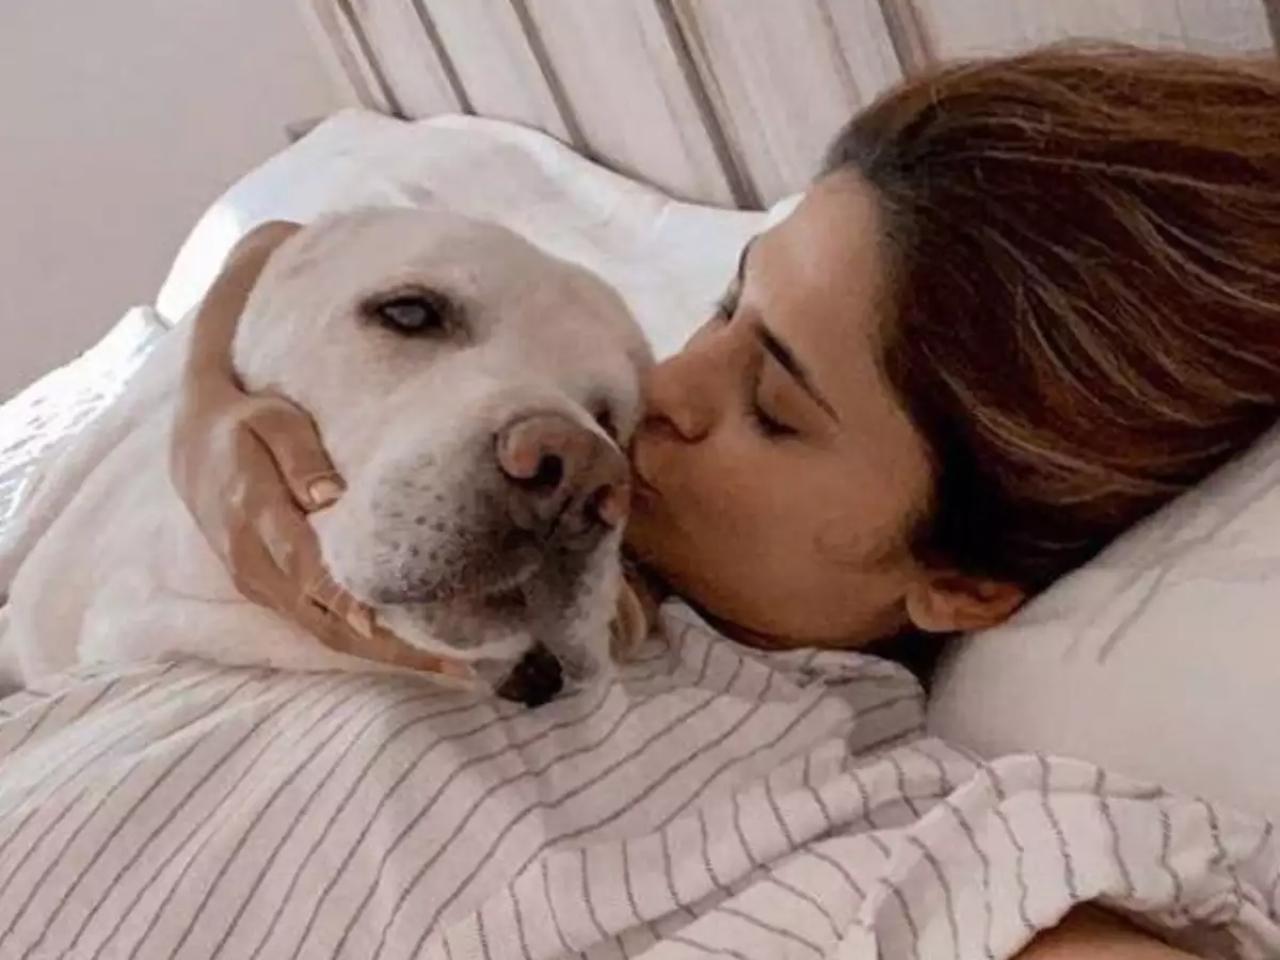 When Breezer passed away earlier this year, Jennifer penned an emotional note celebrating their bond. Sharing some beautiful photos of him, she wrote, 